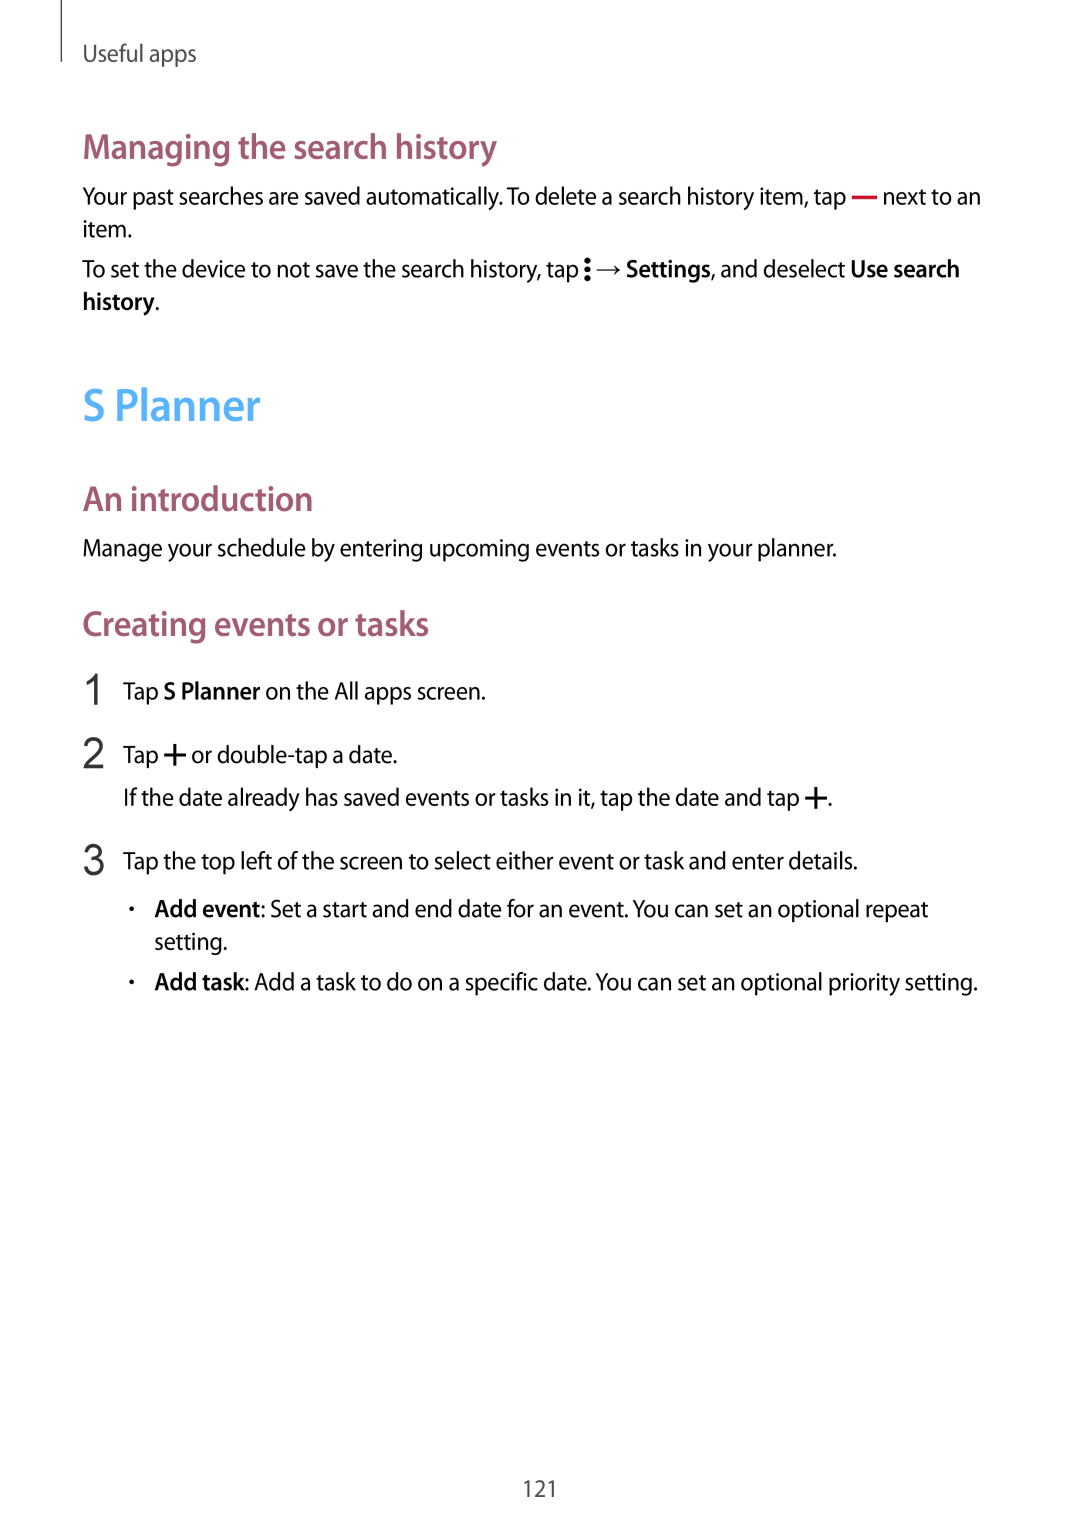 Samsung SM-N915FZWYSEB S Planner, Managing the search history, Creating events or tasks, An introduction, Useful apps 